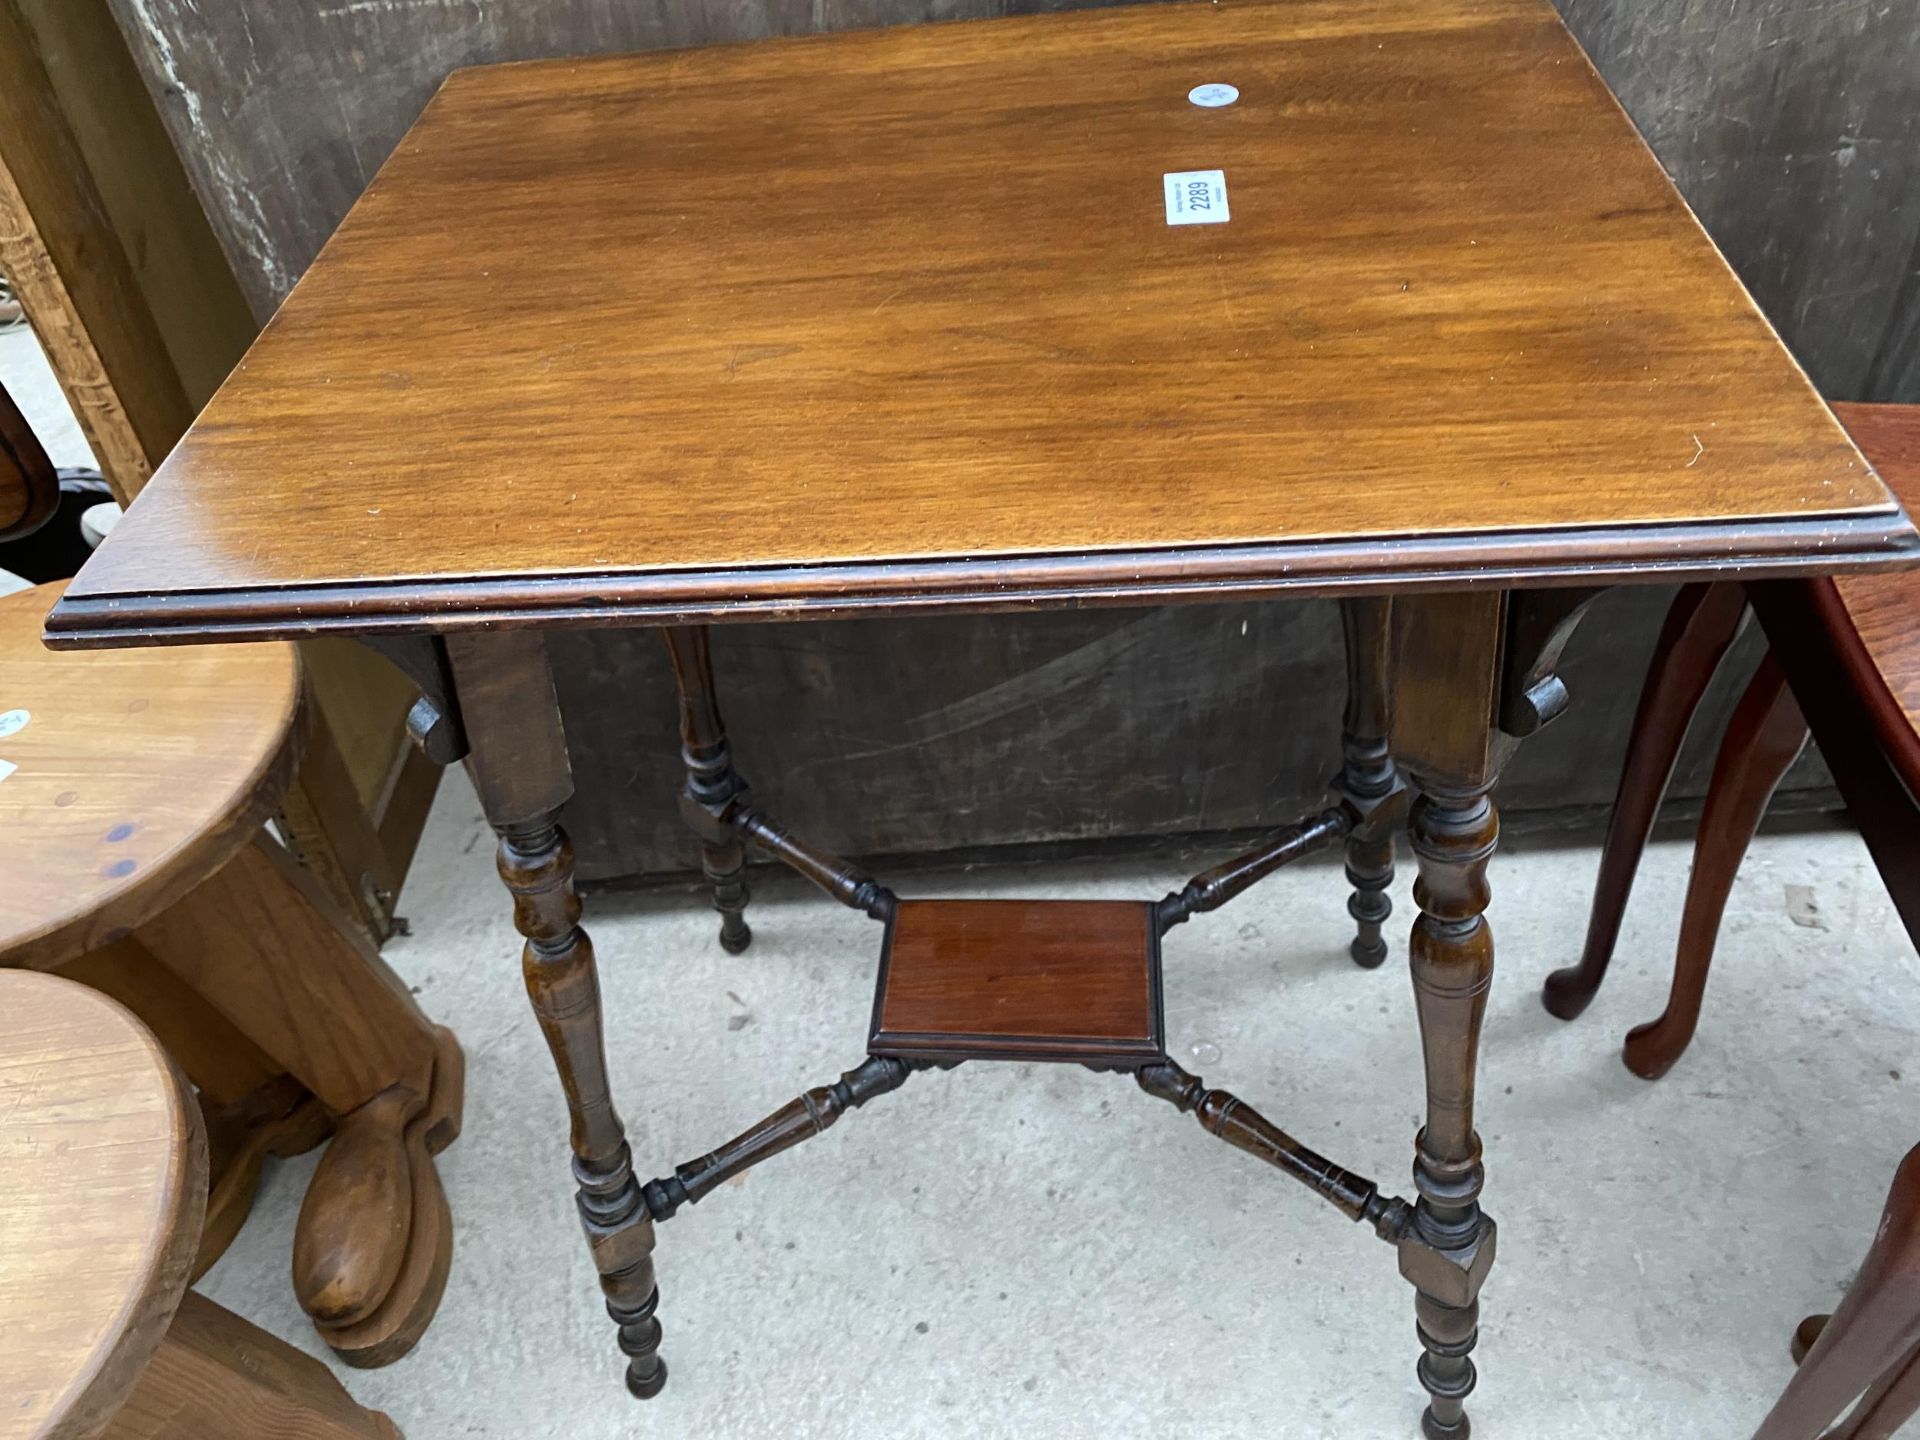 A LATE VICTORIAN MAHOGANY TWO TIER OCCASIONAL TABLE WITH TURNED LEGS AND STRETCHERS, 20X16" - Image 3 of 3